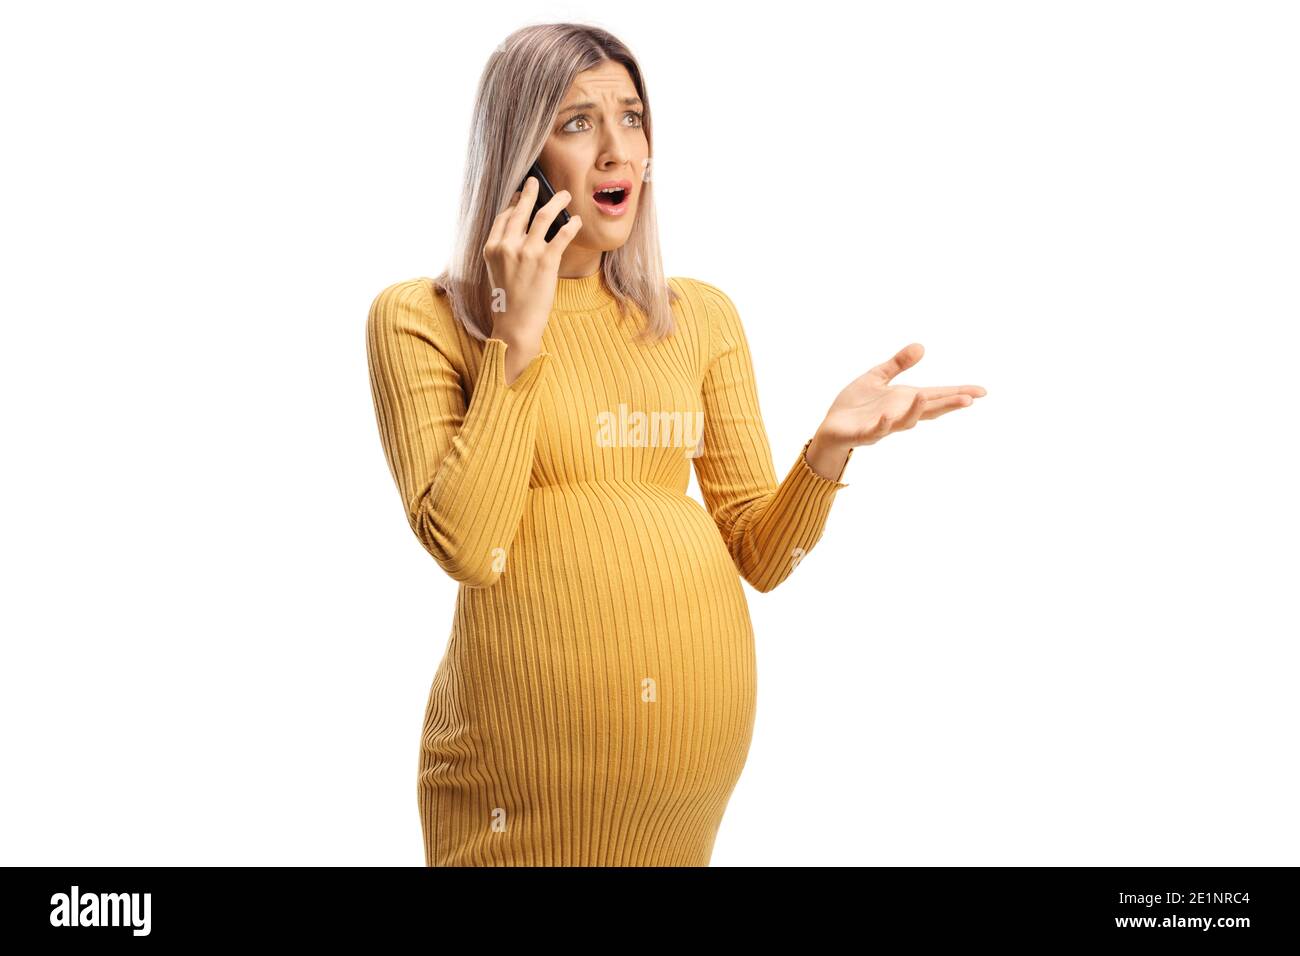 Stressed pregnant woman talking on a mobile phone isolated on white background Stock Photo